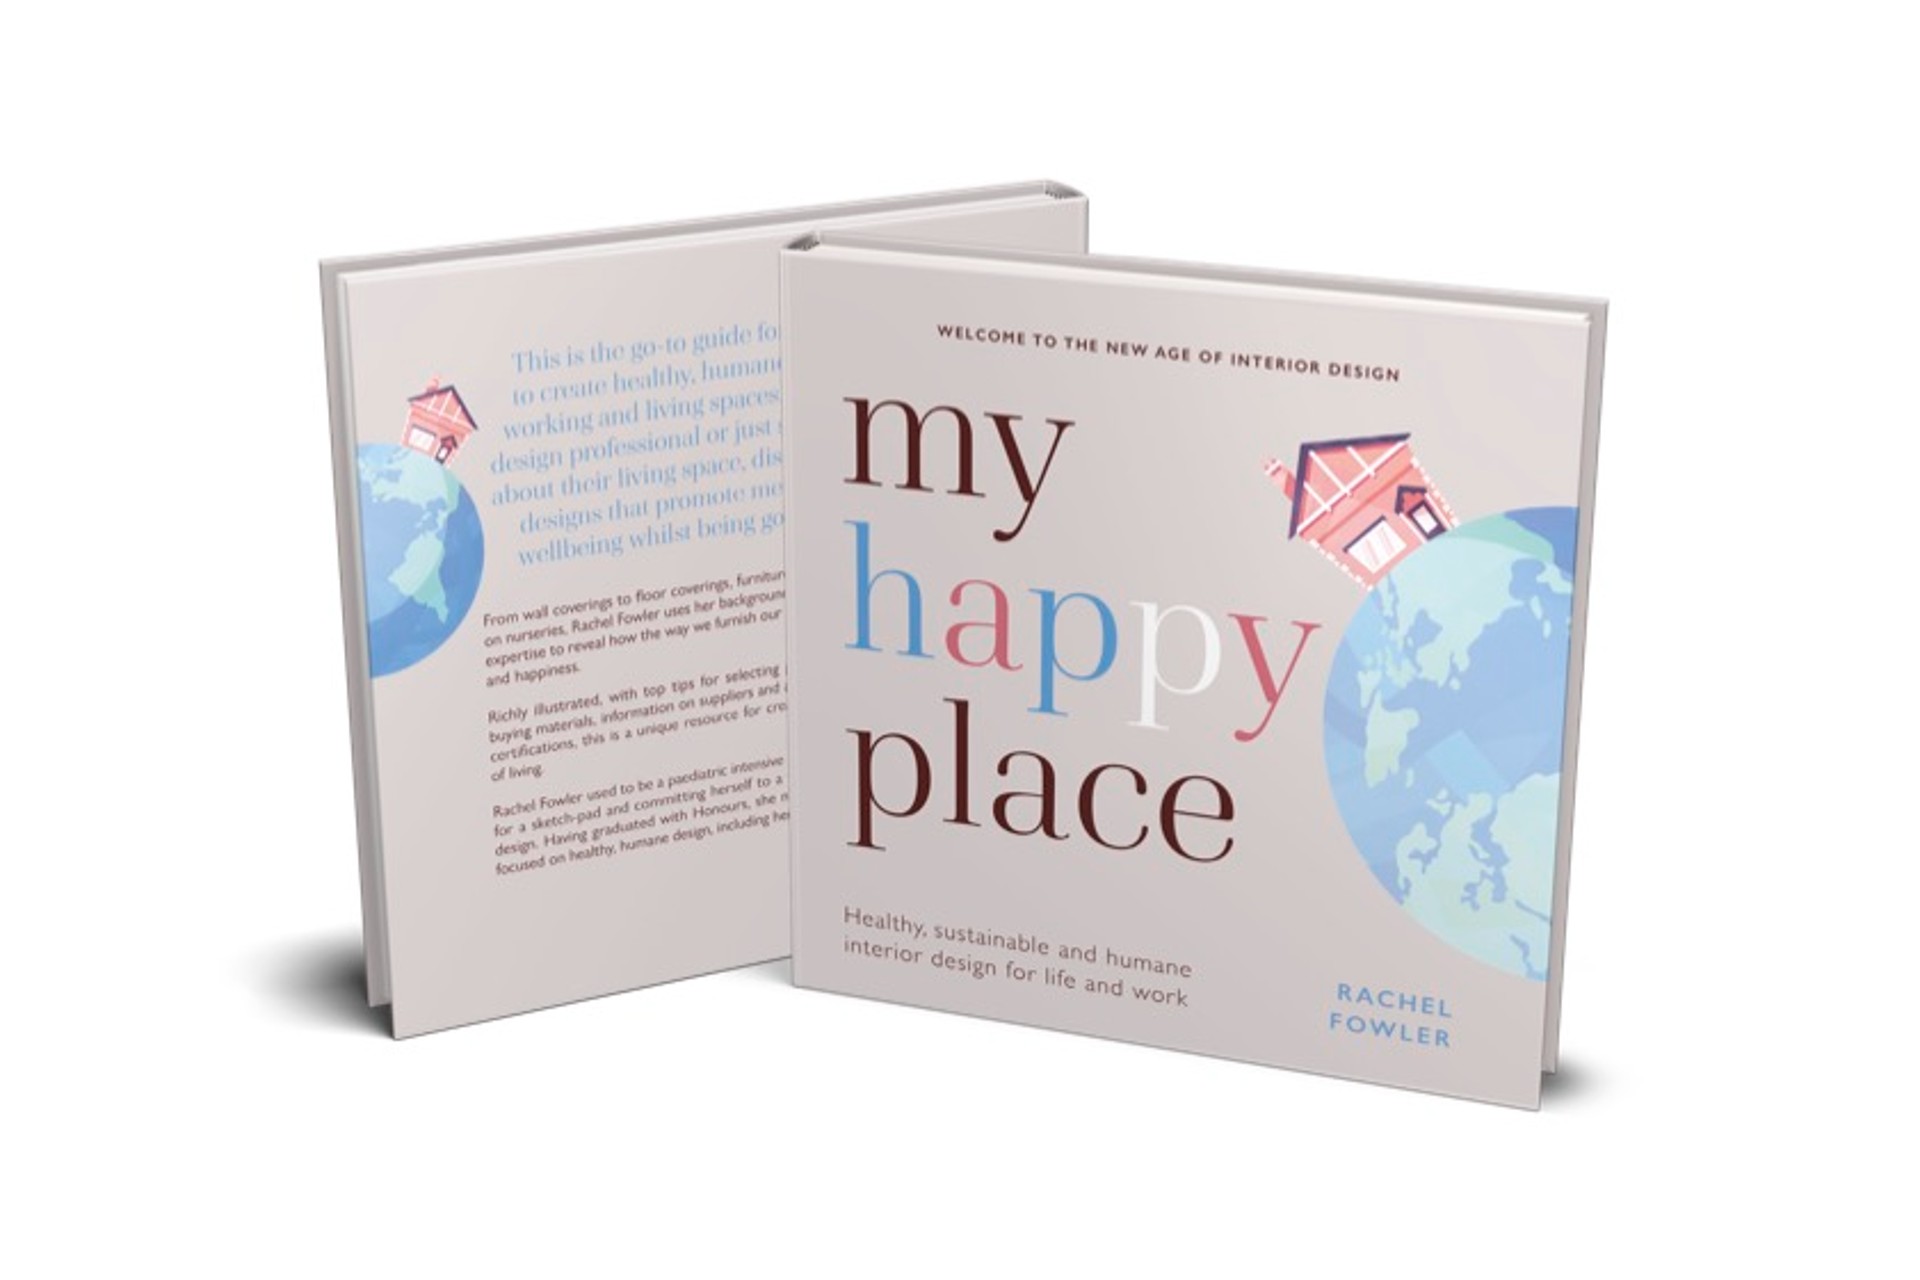 A new book by a former paediatric intensive care nurse looks set to be the ‘go-to-guide’ for anyone aspiring to create healthy, humane and sustainable working and living spaces.